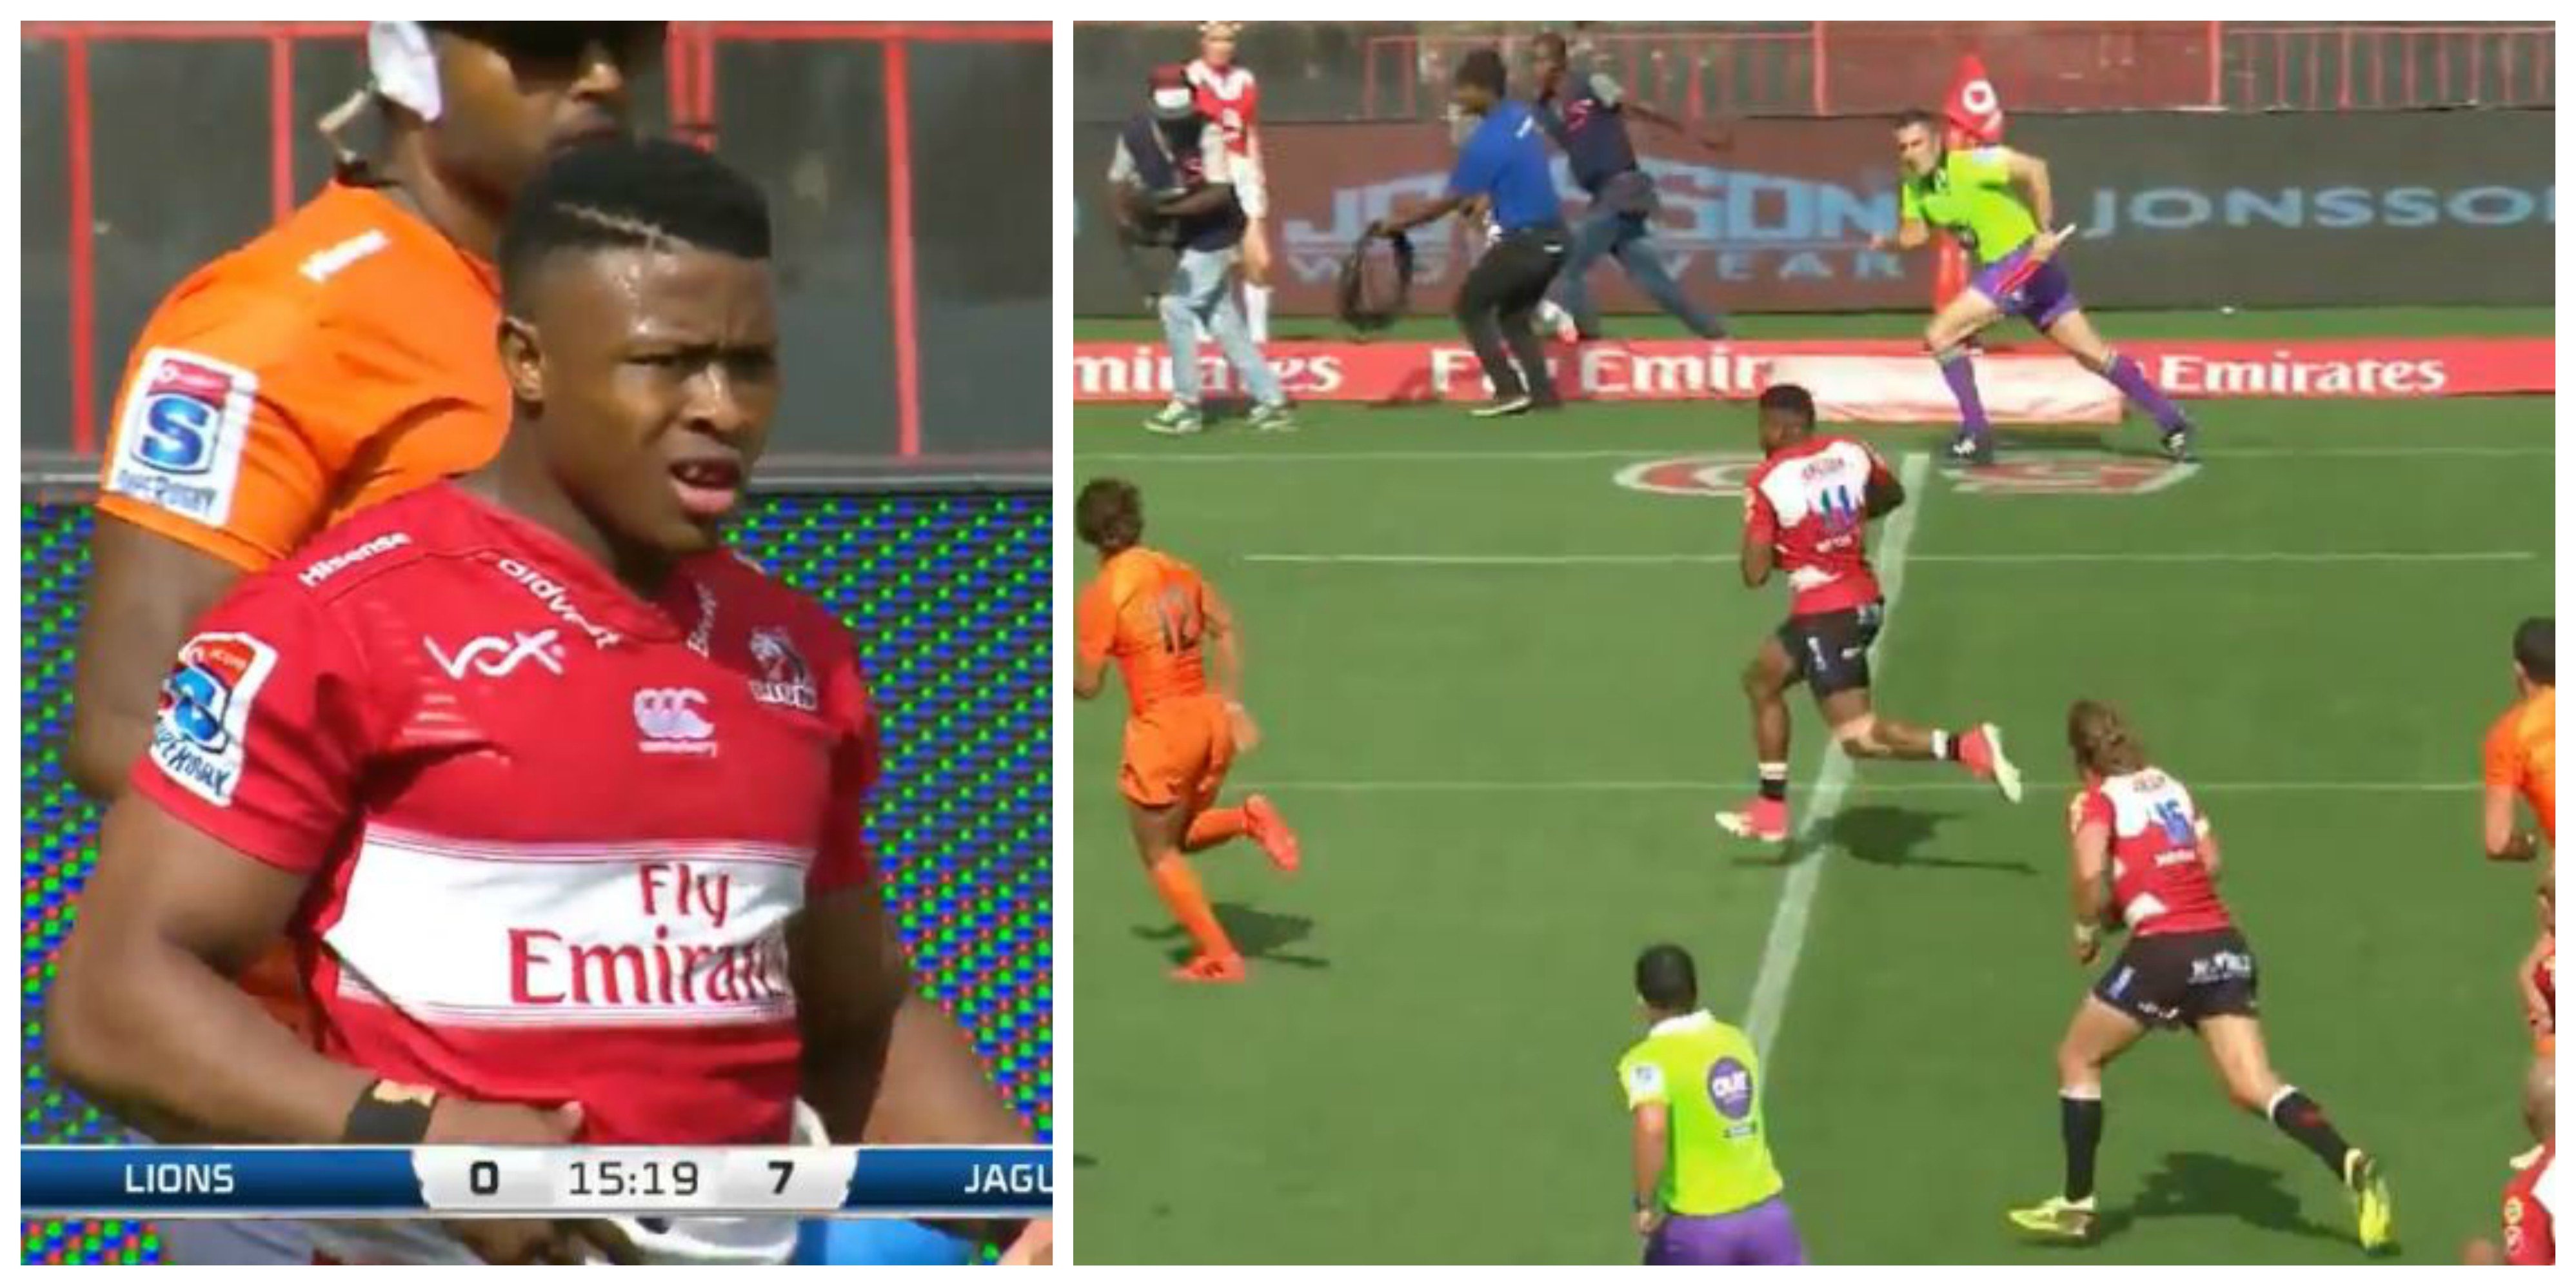 Watch Aphiwe Dyantyi living up to massive hype as SA's best rugby prospect